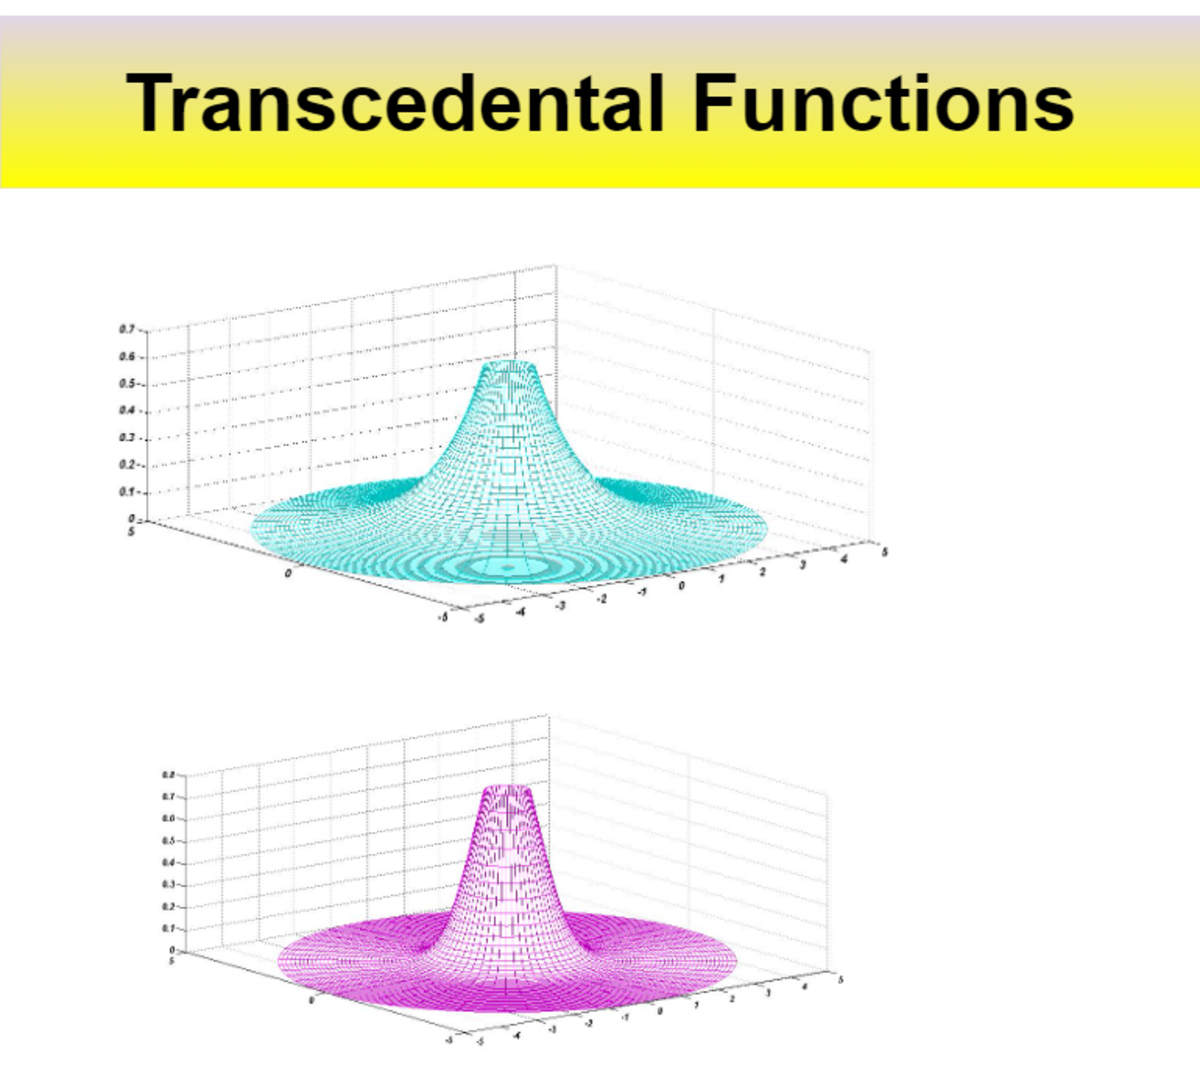 What are Transcendental Functions?